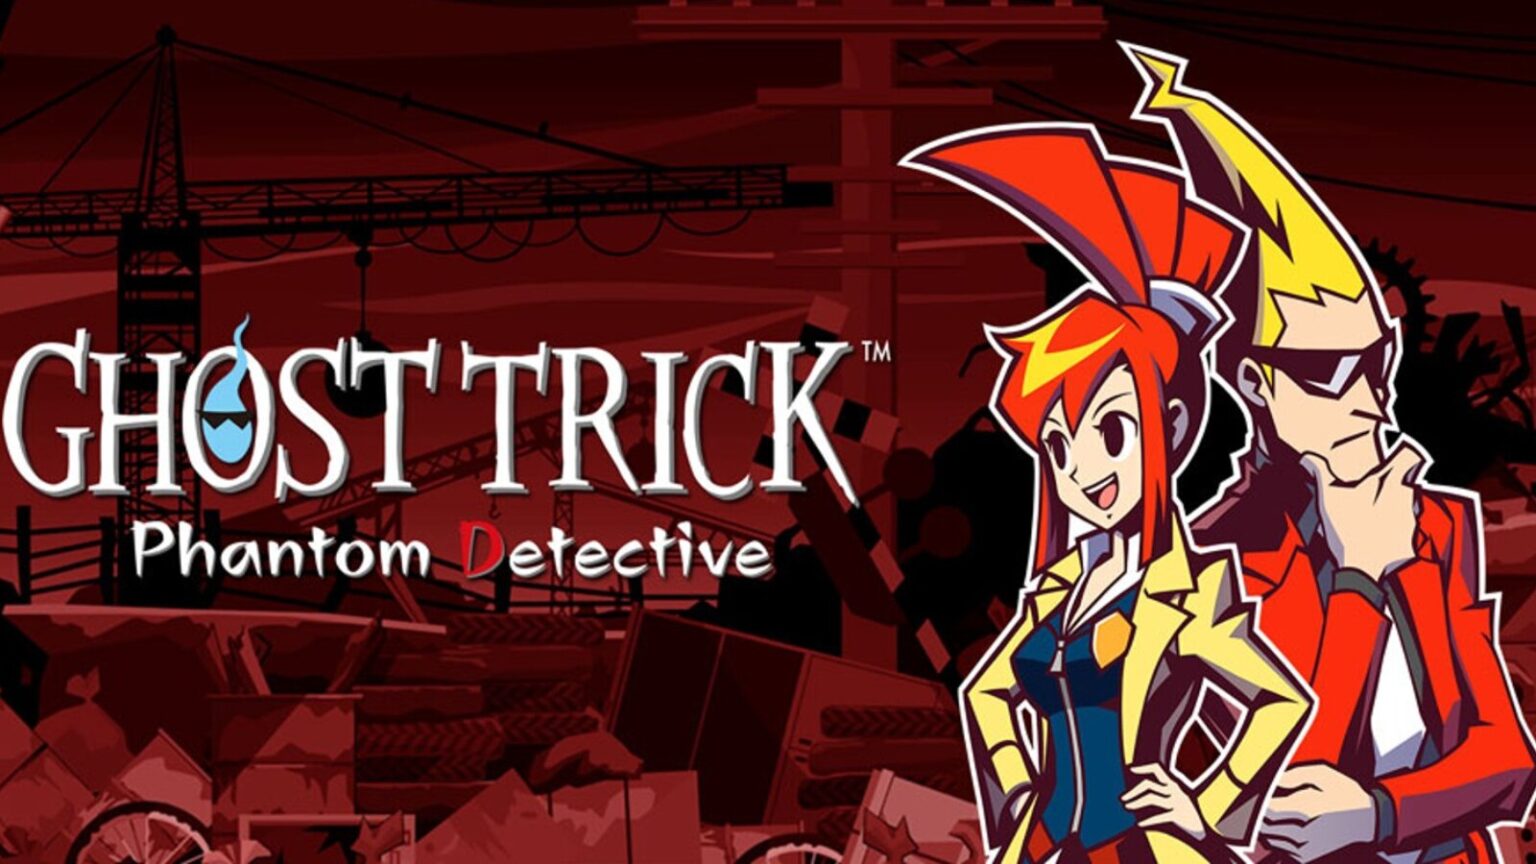 Ghost Trick: Phantom Detective Remaster features bold characters and a stylized logo